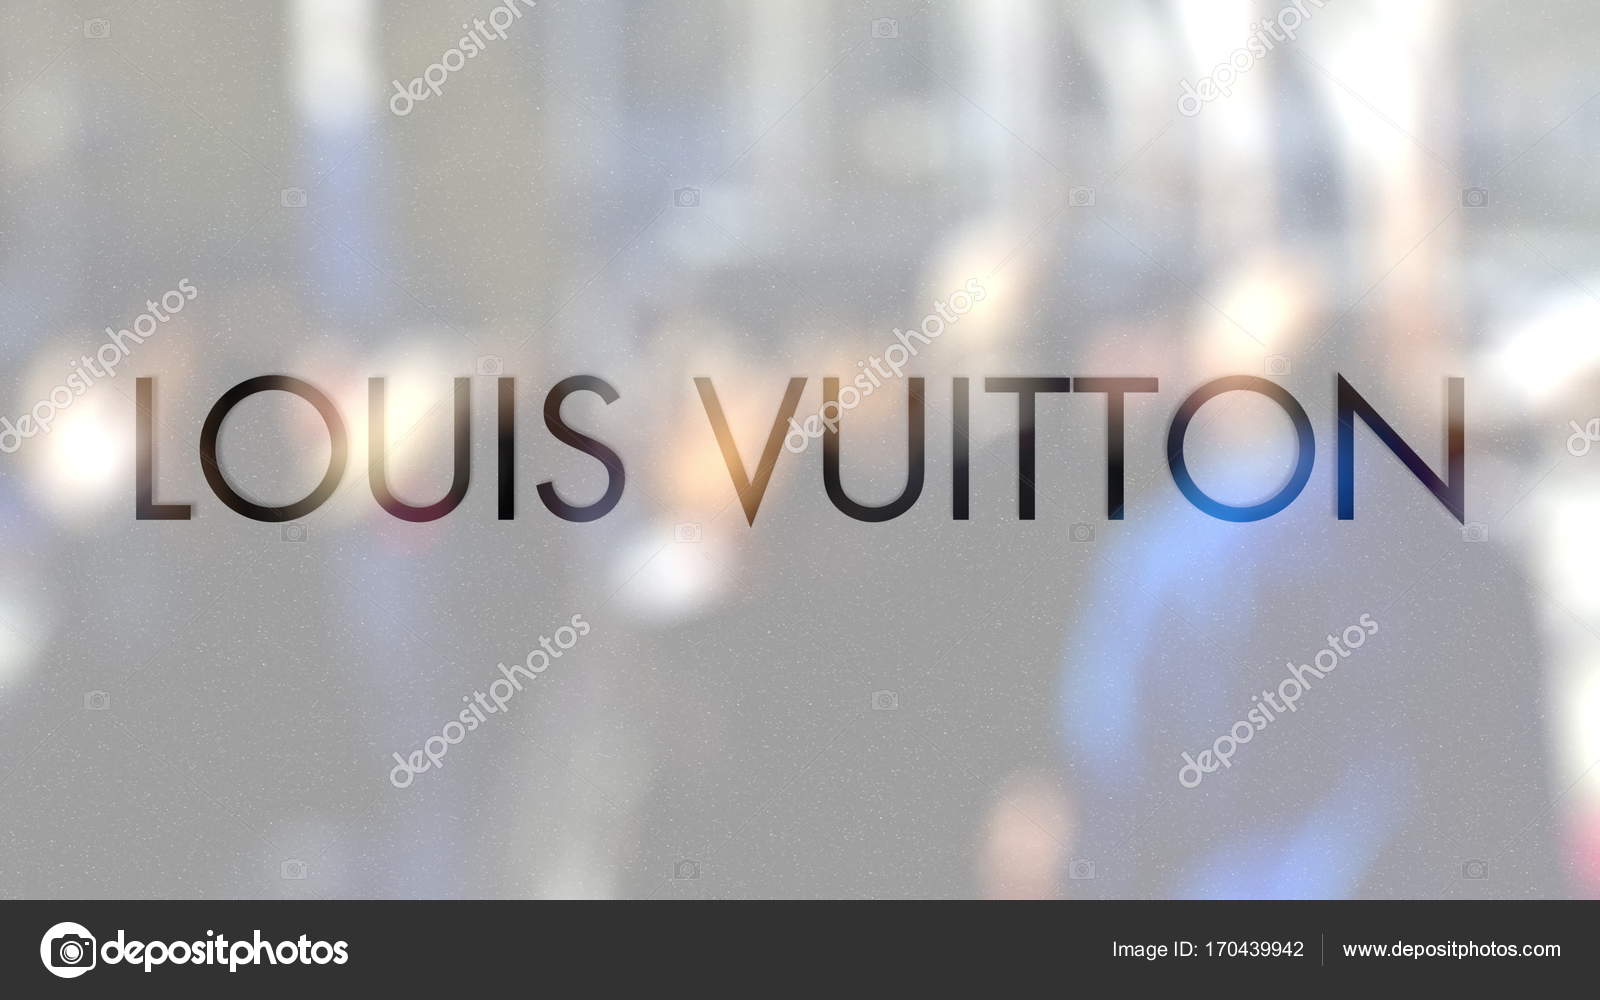 Louis Vuitton logo on a glass against blurred crowd on the steet